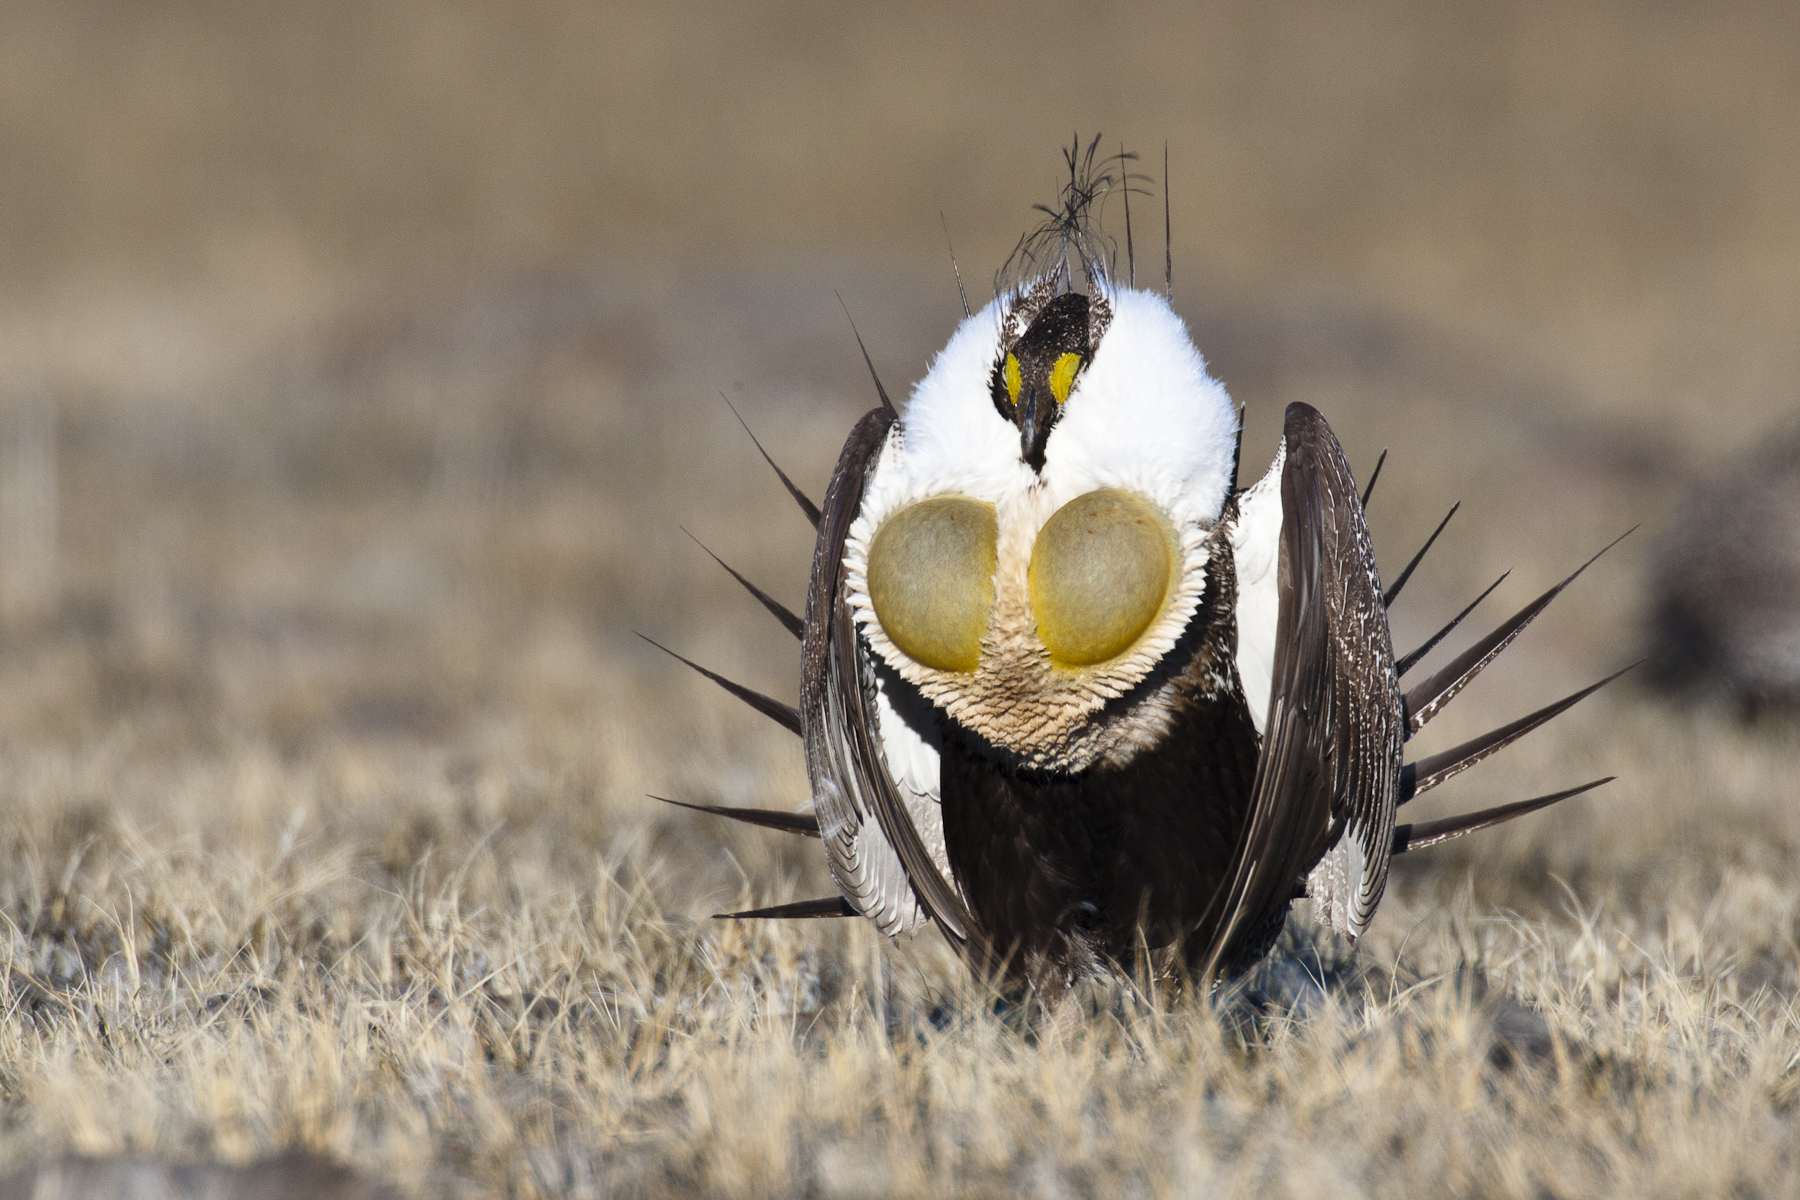 Feds call for cooperative conservation on sage grouse, states deliver